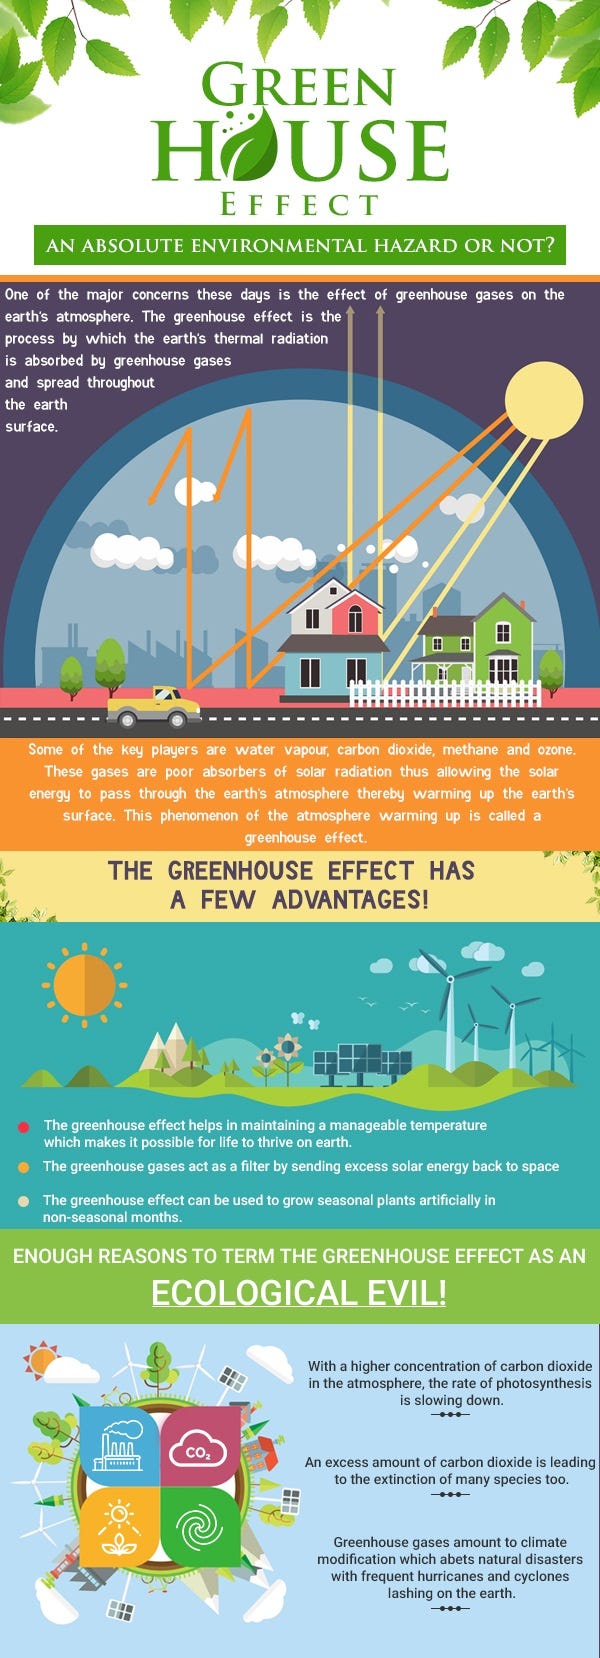 Advantages Or Disadvantages Of The Greenhouse Effect By Maria Mith Medium